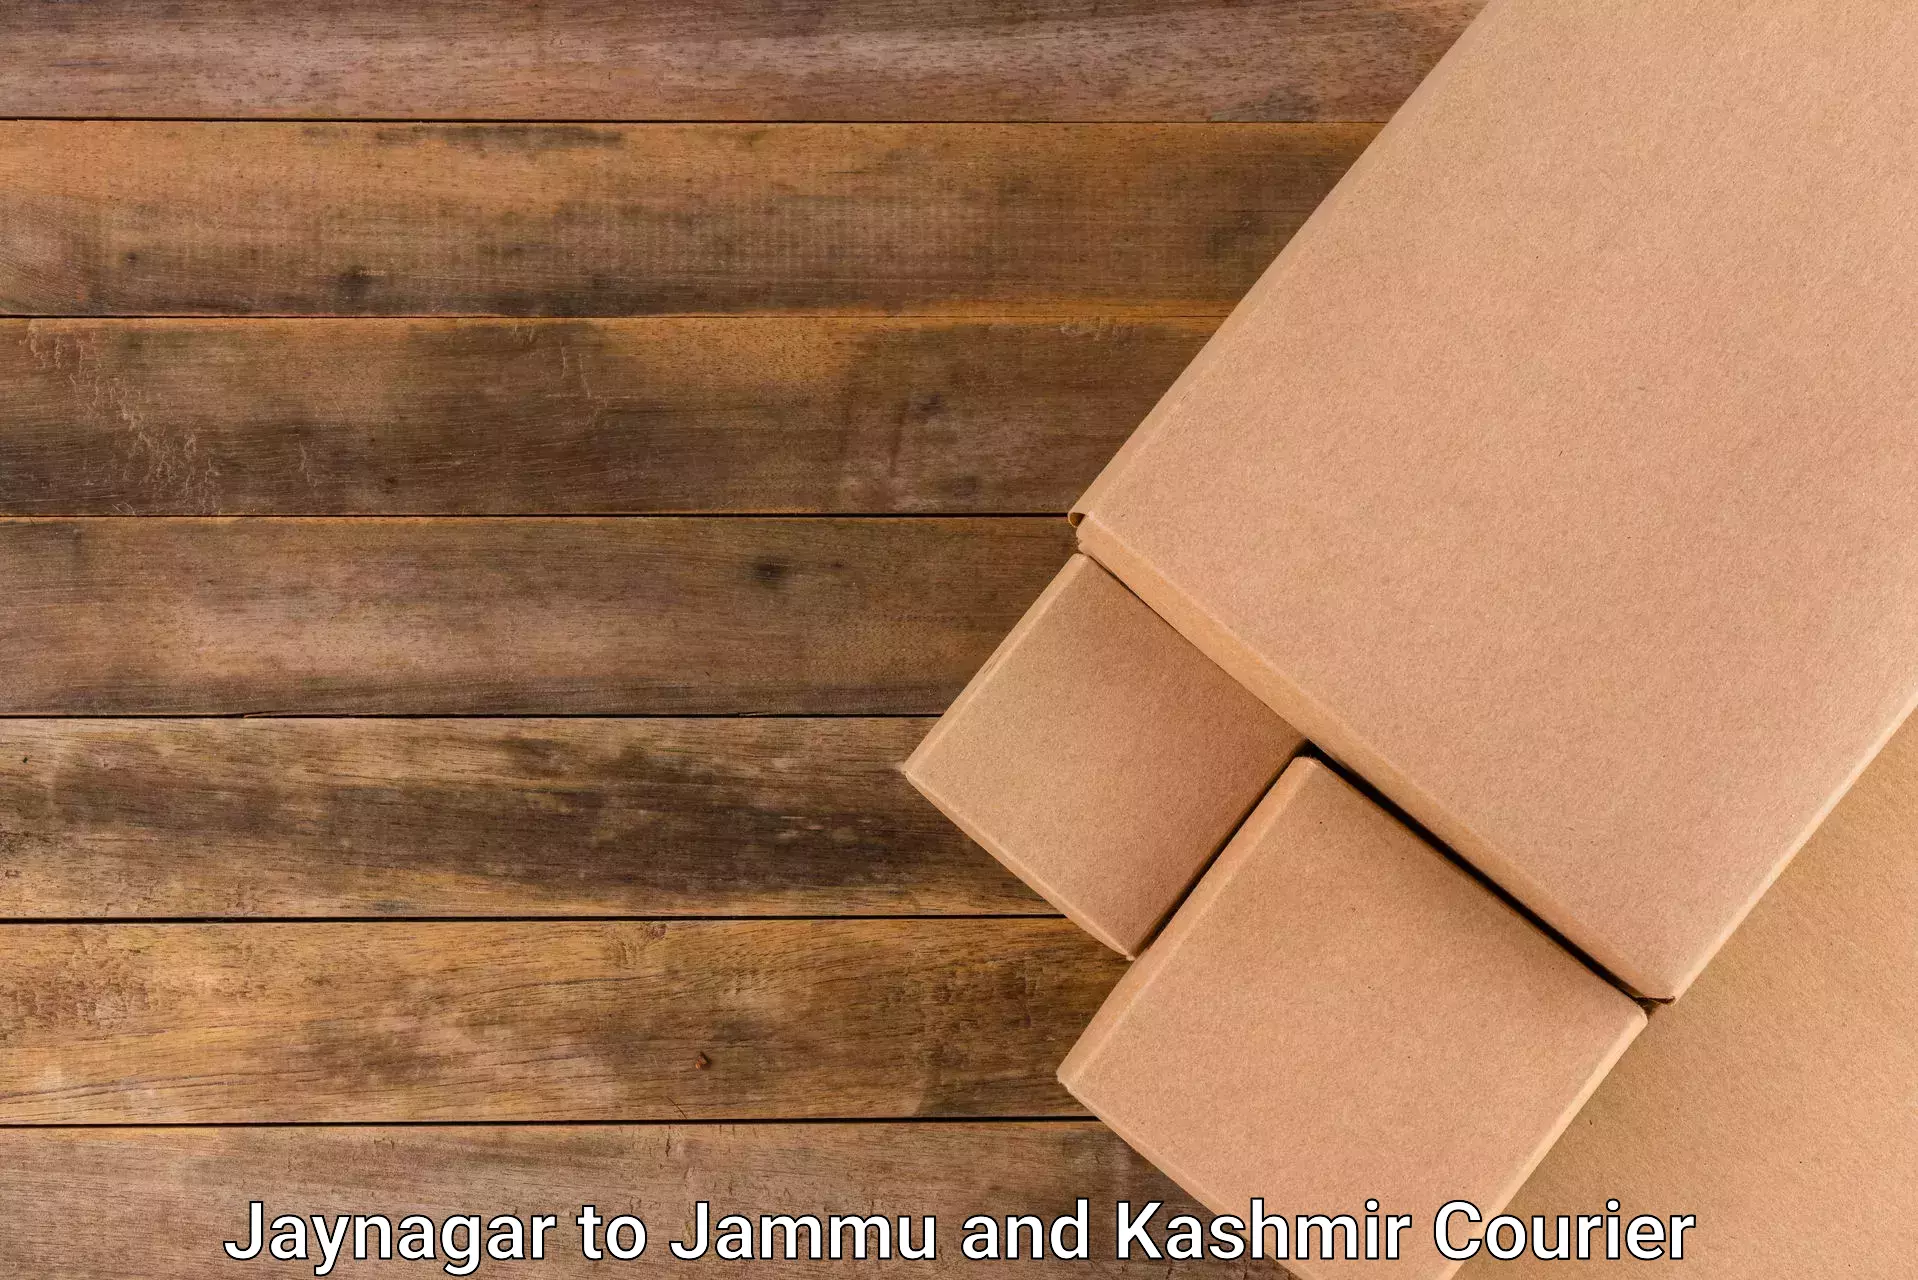 Easy access courier services Jaynagar to Rajouri